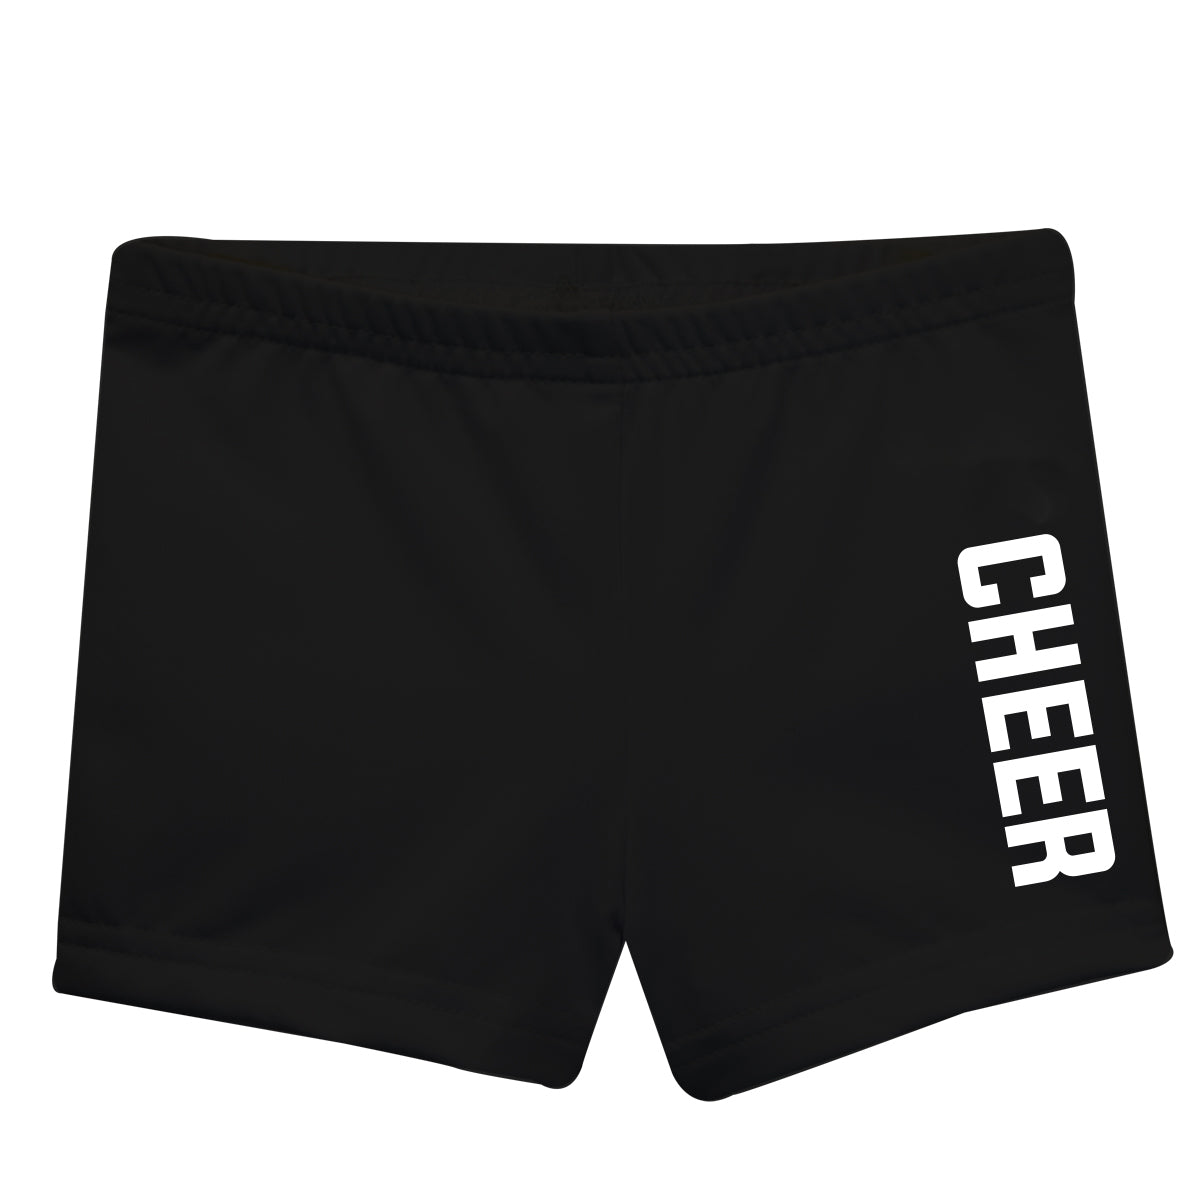 Cheer Personalized Name Black Shorties - Wimziy&Co.